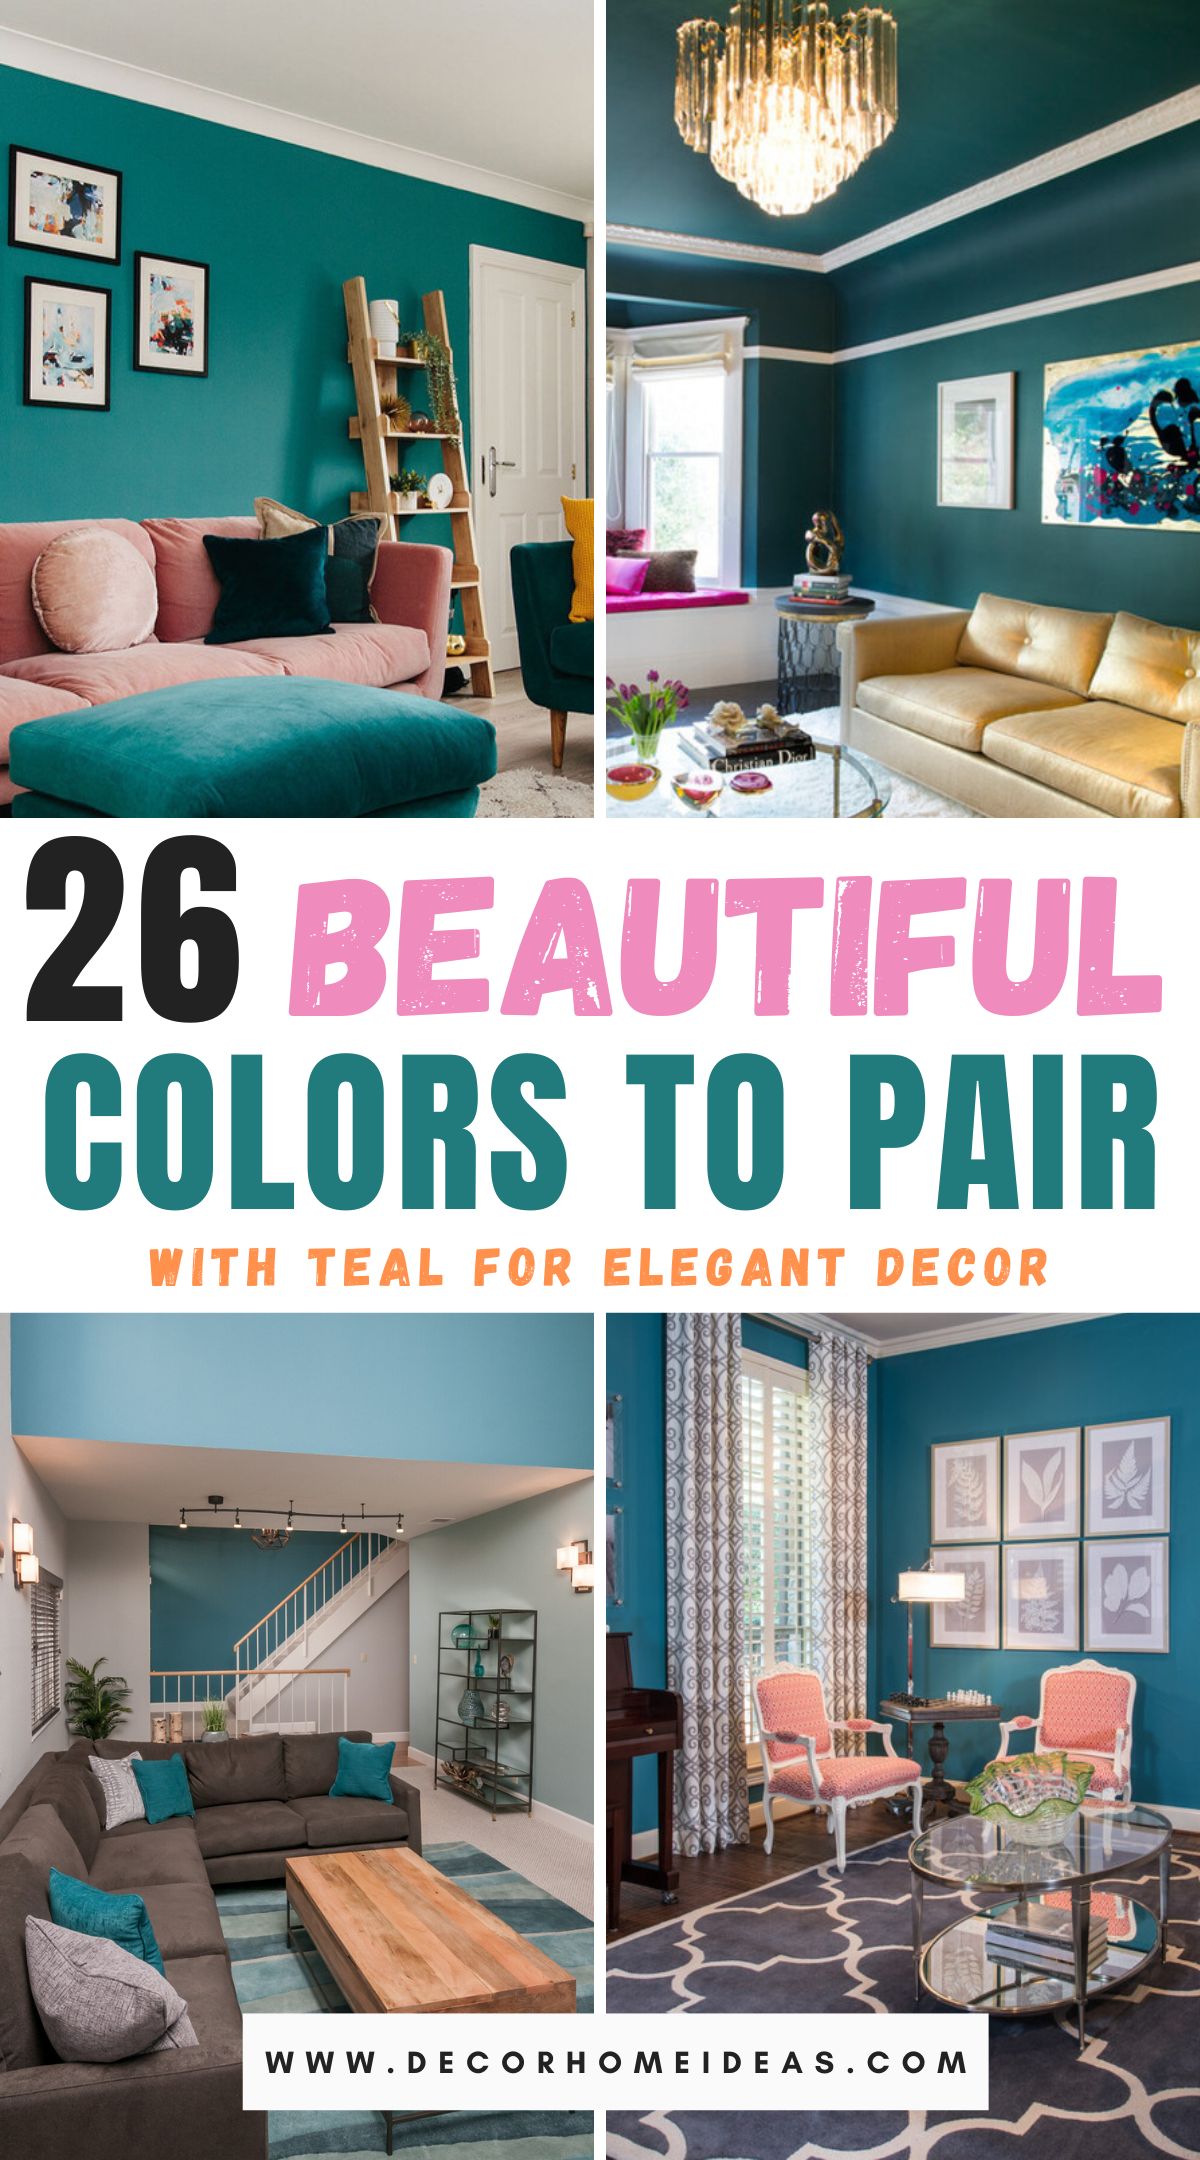 Elevate your decor with these 26 harmonious colors to pair with teal. From earthy neutrals to vibrant accents, discover elegant combinations that complement teal beautifully, adding sophistication and style to your space.